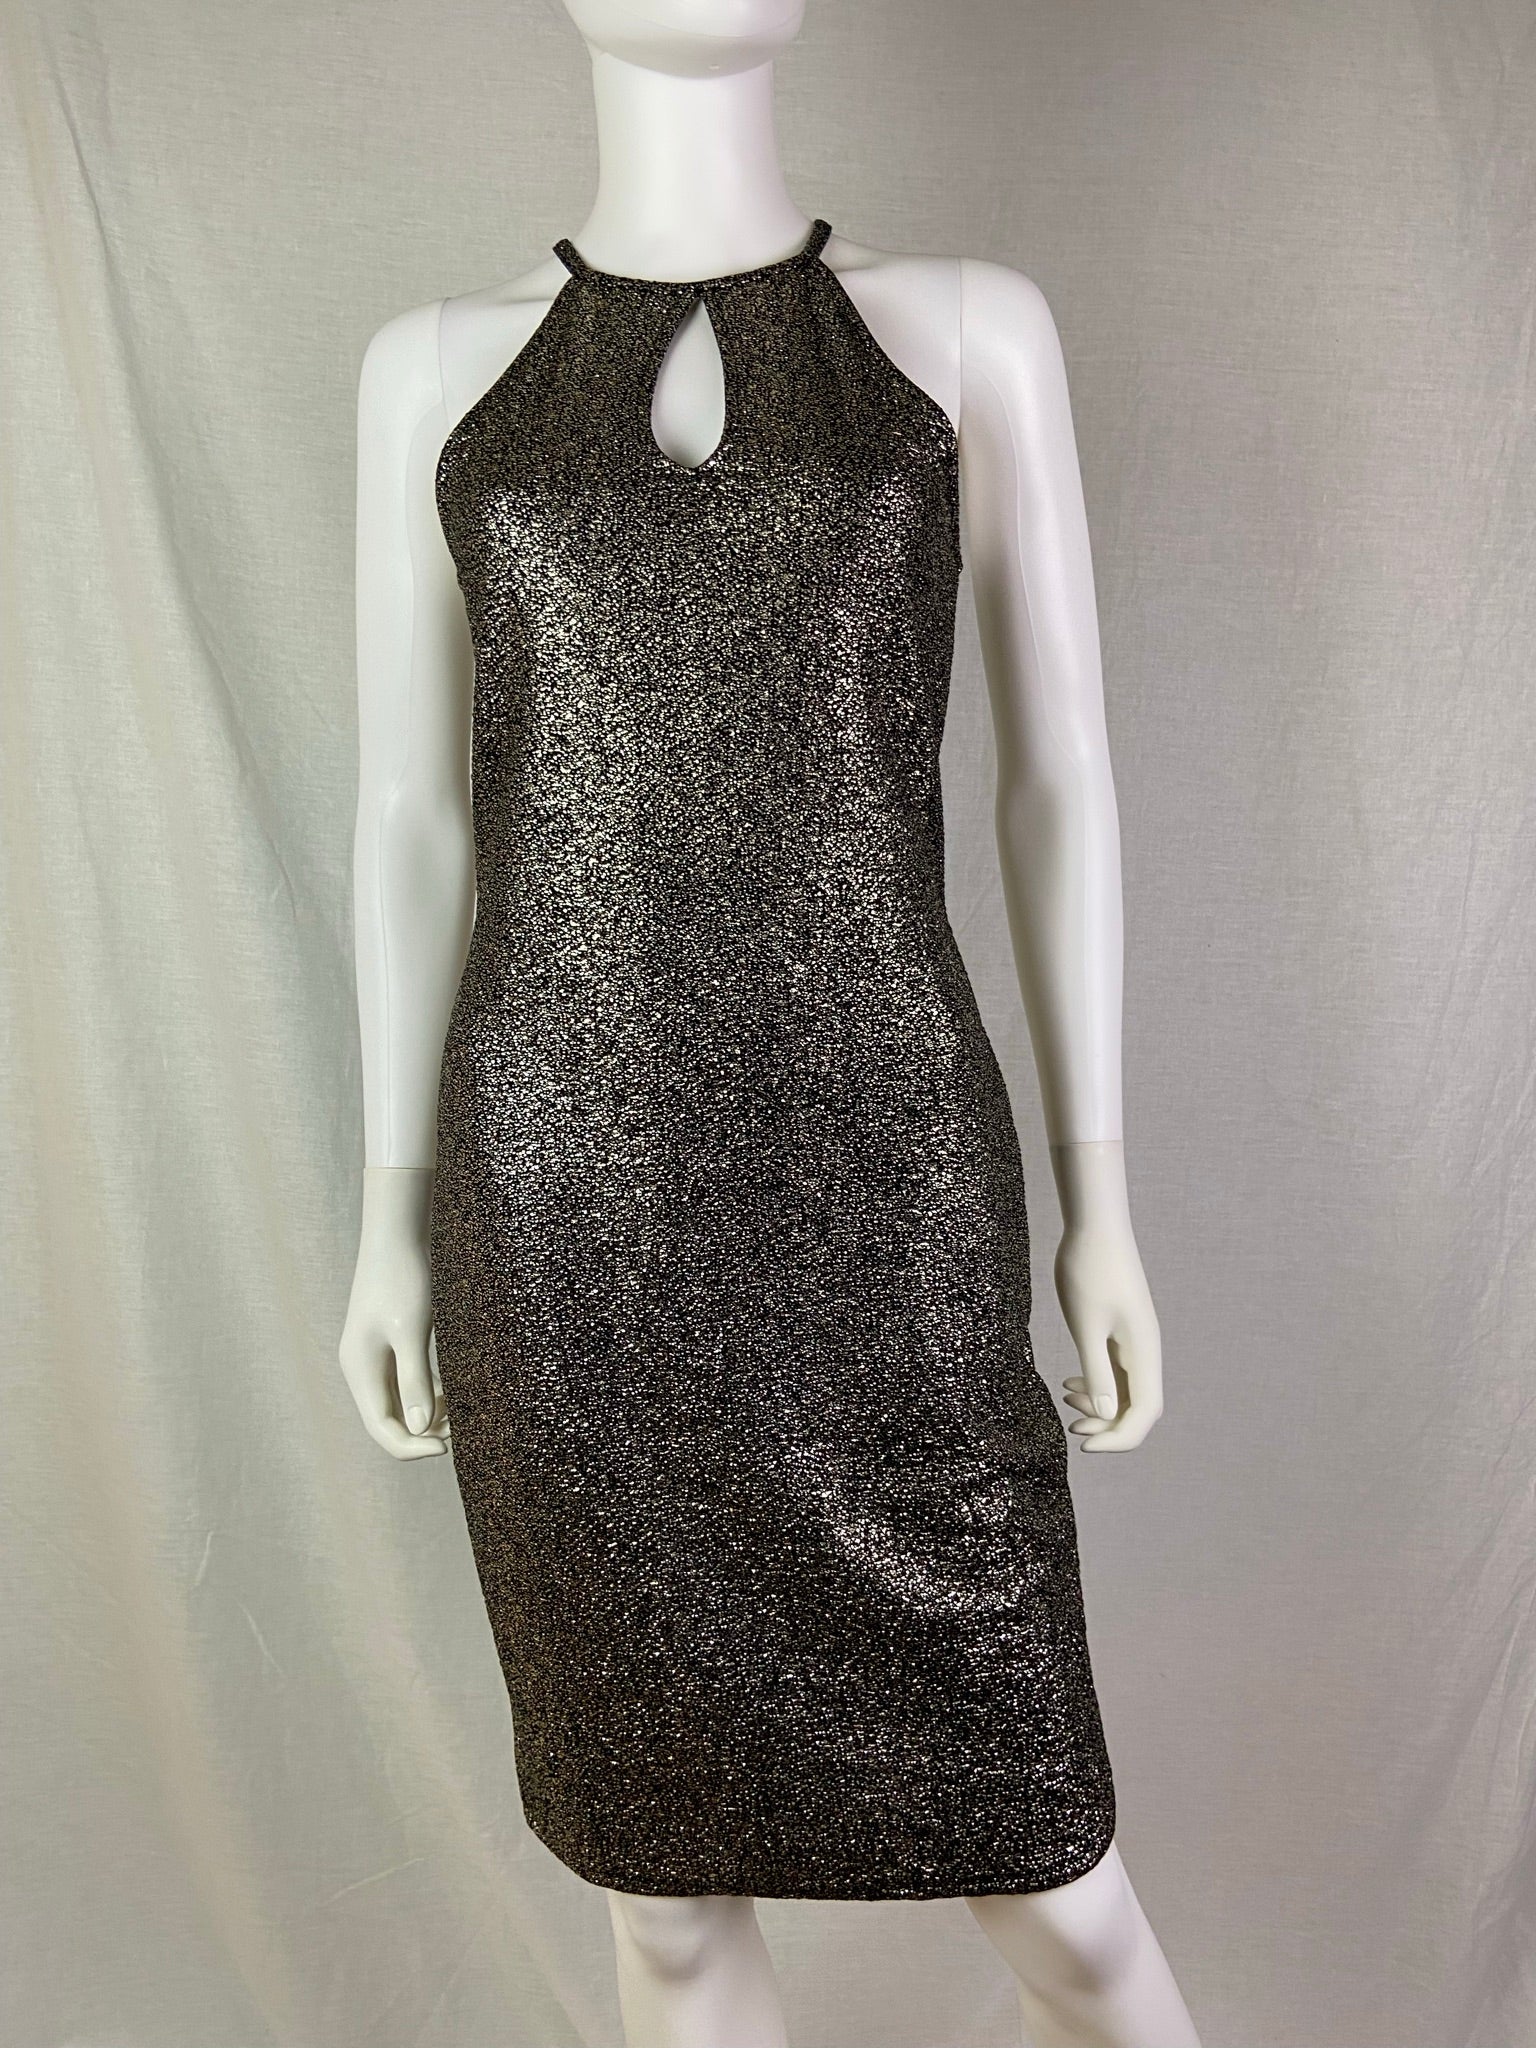 One Clothing Gold Silver Pewter Black Foil Stretch Cocktail Dress ABBY ESSIE STUDIOS